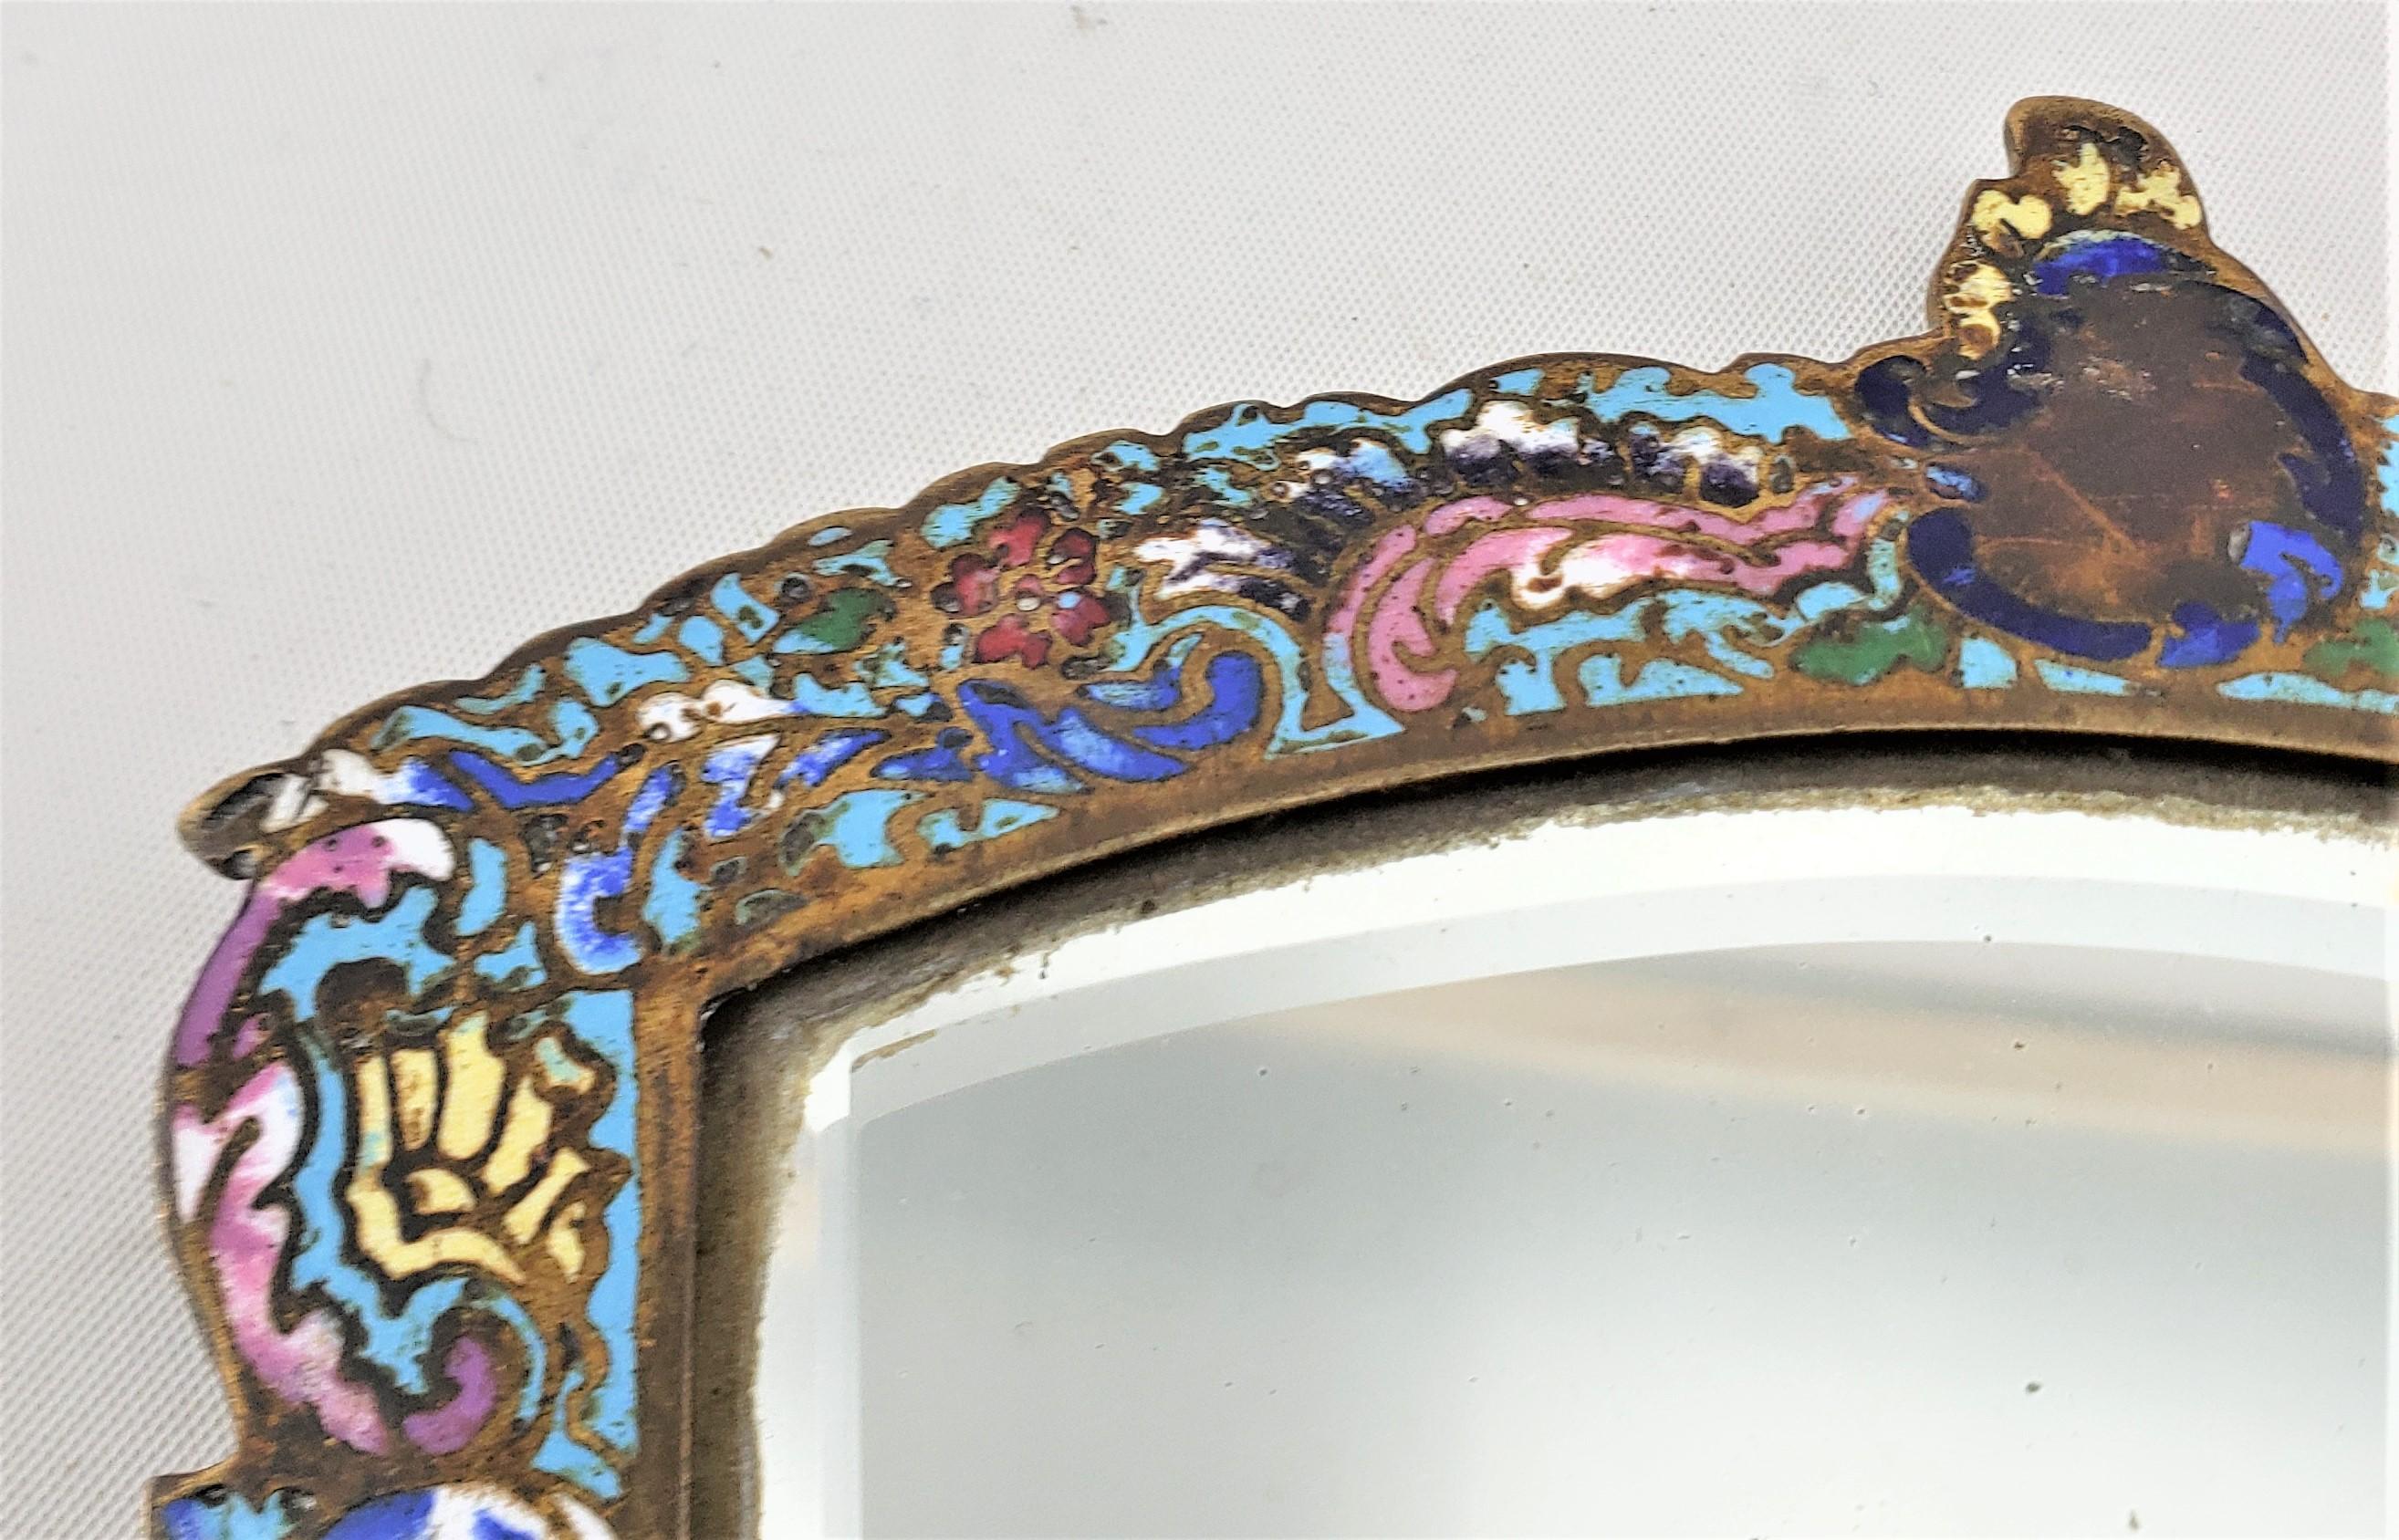 Antique French Champleve  Enameled Hand-Held Dresser Mirror with Floral Motif For Sale 1